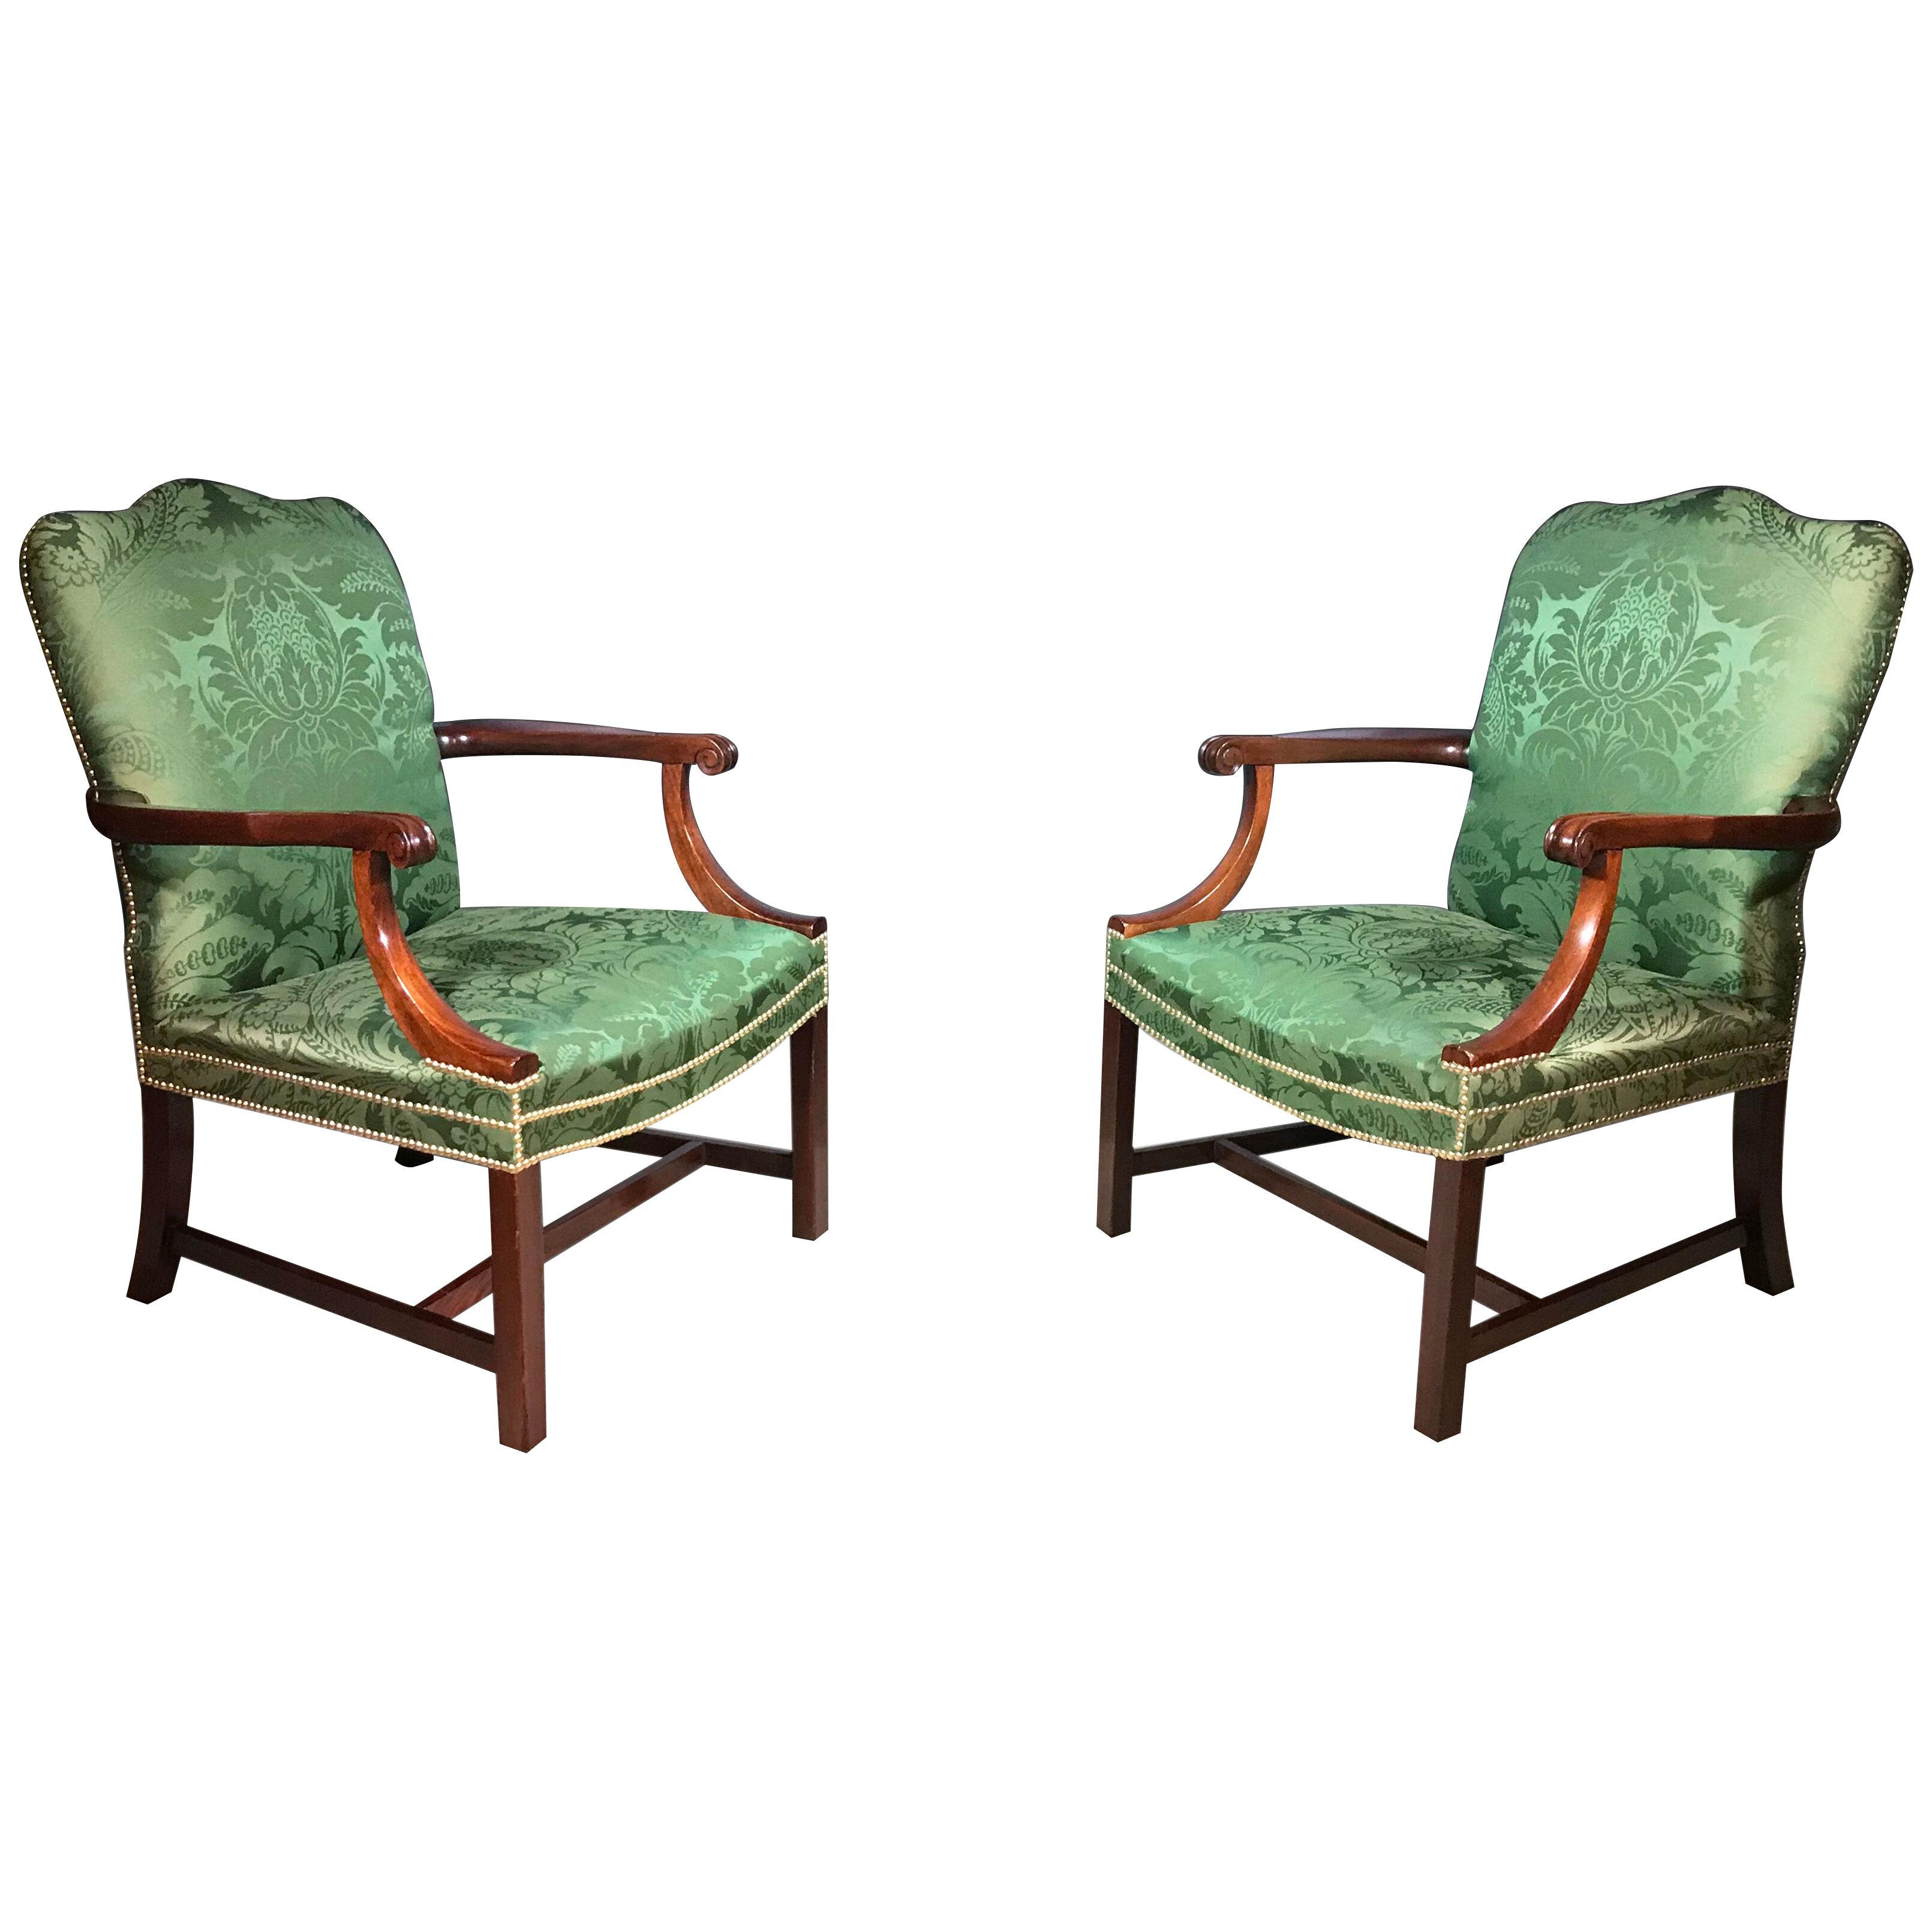 Pair of Chippendale Period Mahogany Gainsborough Armchairs